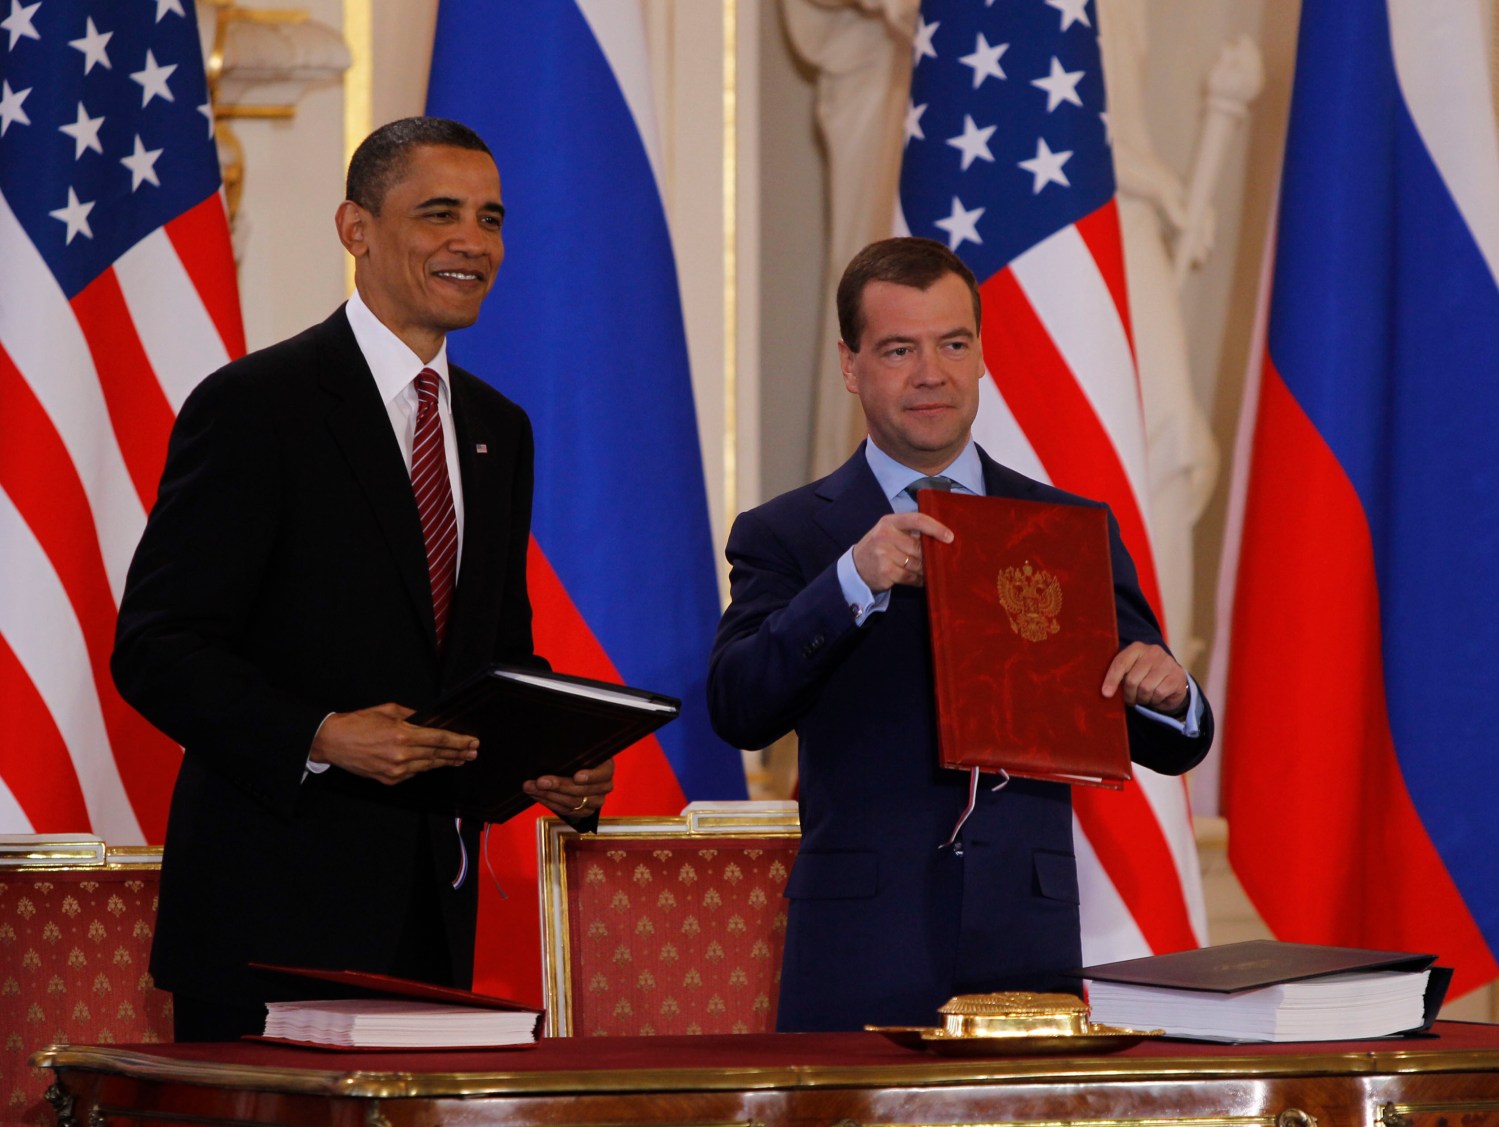 U.S. President Barack Obama (L) and Russian President Dmitry Medvedev (R) present documents after signing the new Strategic Arms Reduction Treaty (START II) at Prague Castle in Prague, April 8, 2010. REUTERS/Jason Reed (CZECH REPUBLIC - Tags: POLITICS MILITARY) - RTR2CK4T